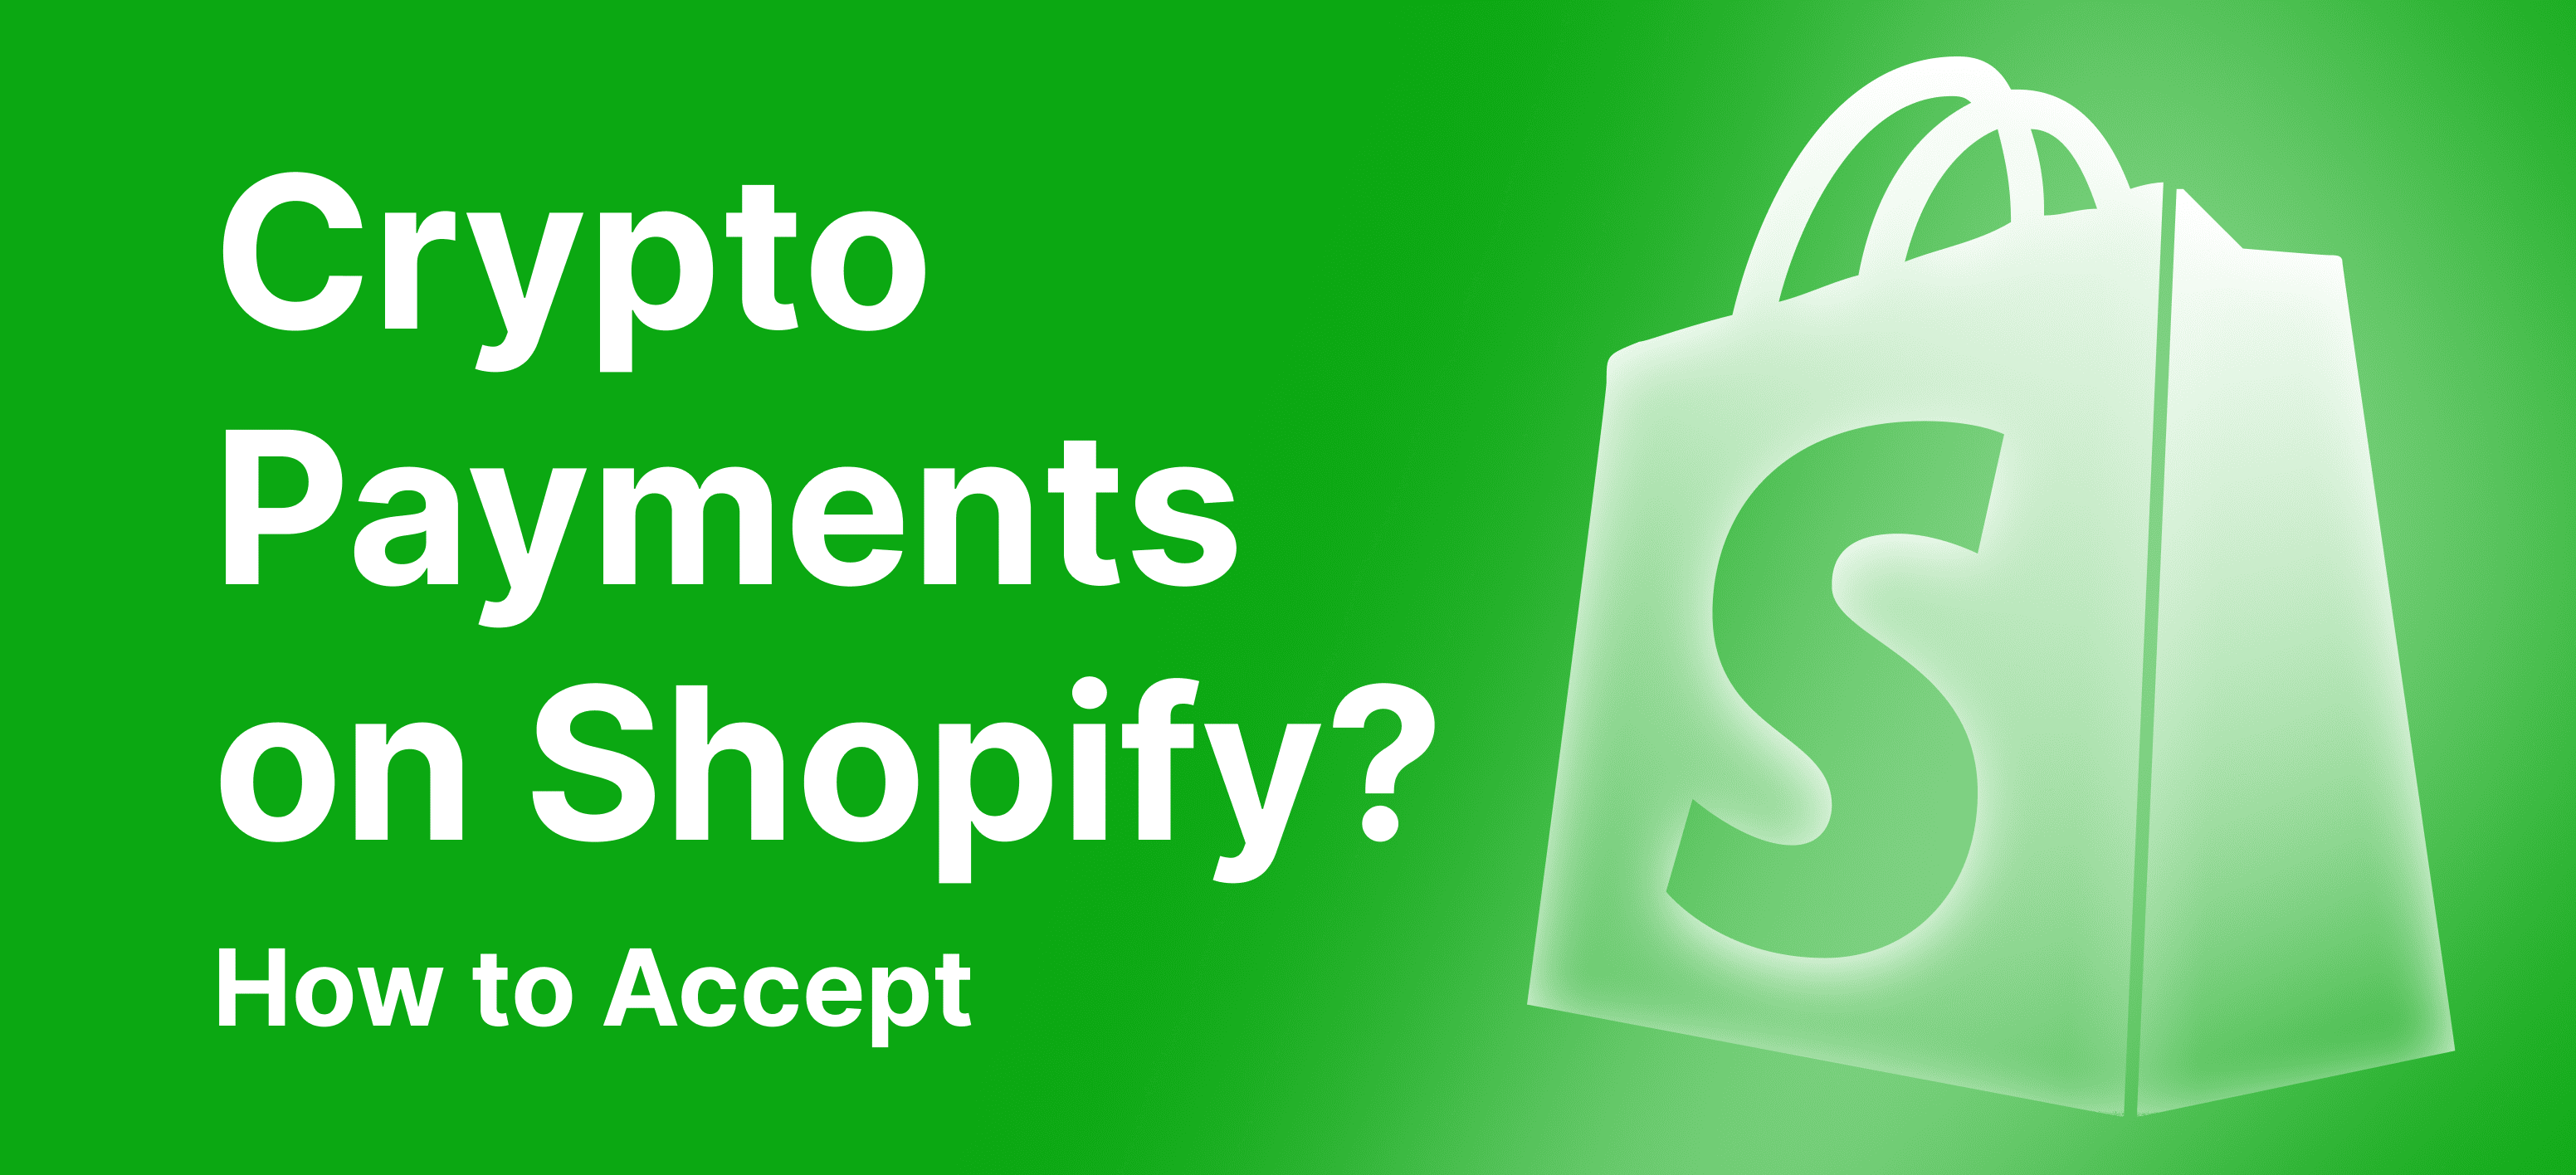 Accepting Cryptocurrency on Shopify